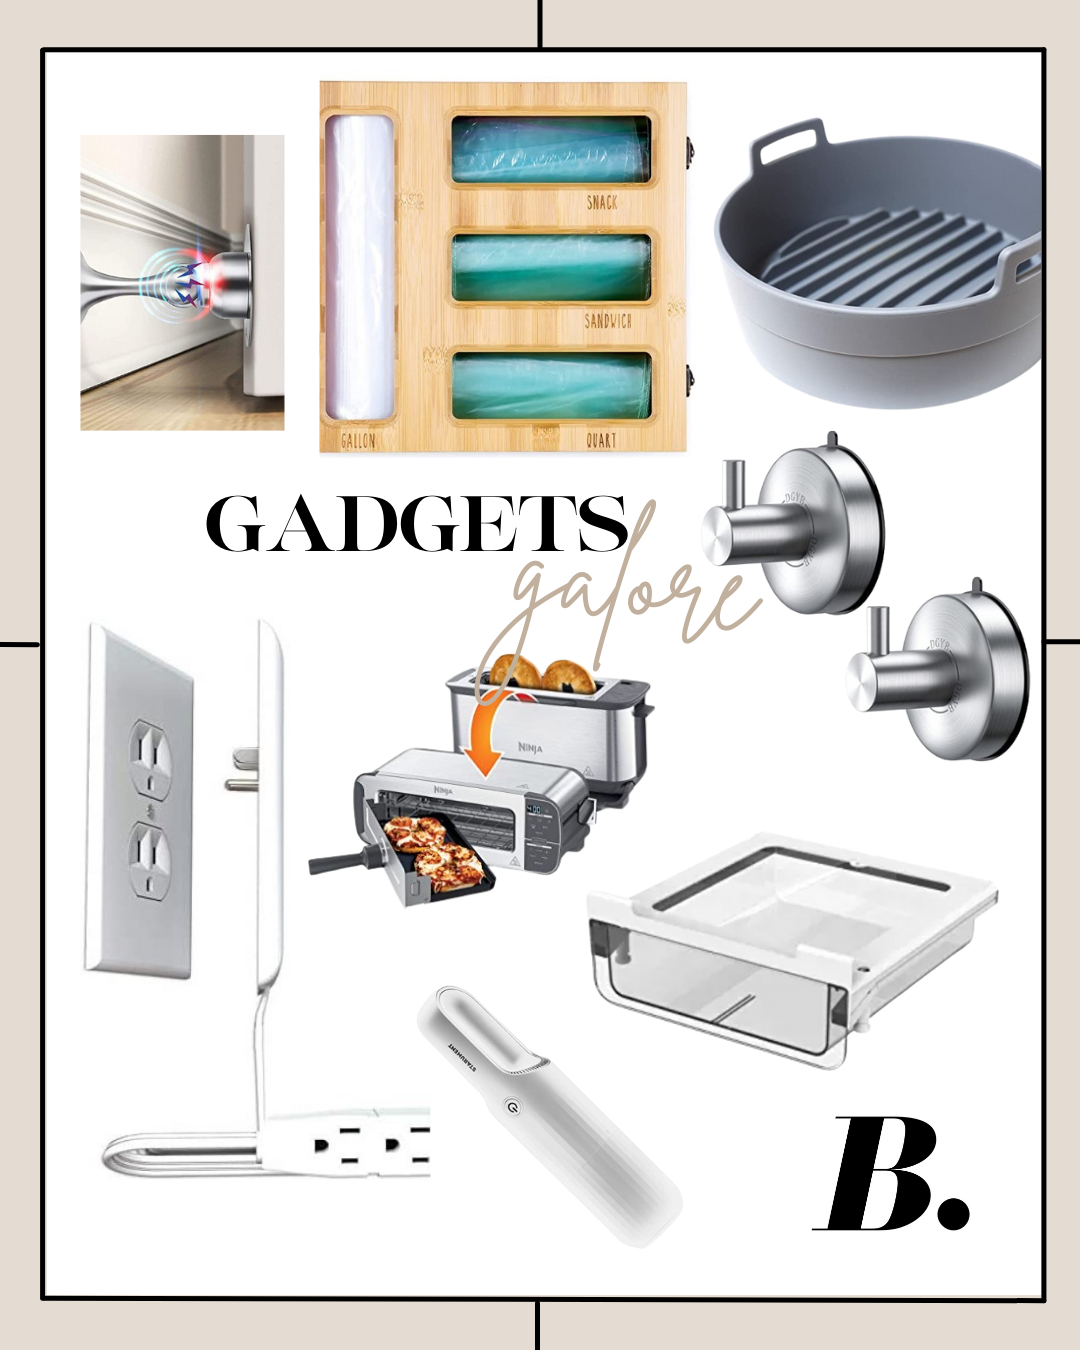 12 Life-Changing Home Gadgets You'll Wonder How You Lived Without!